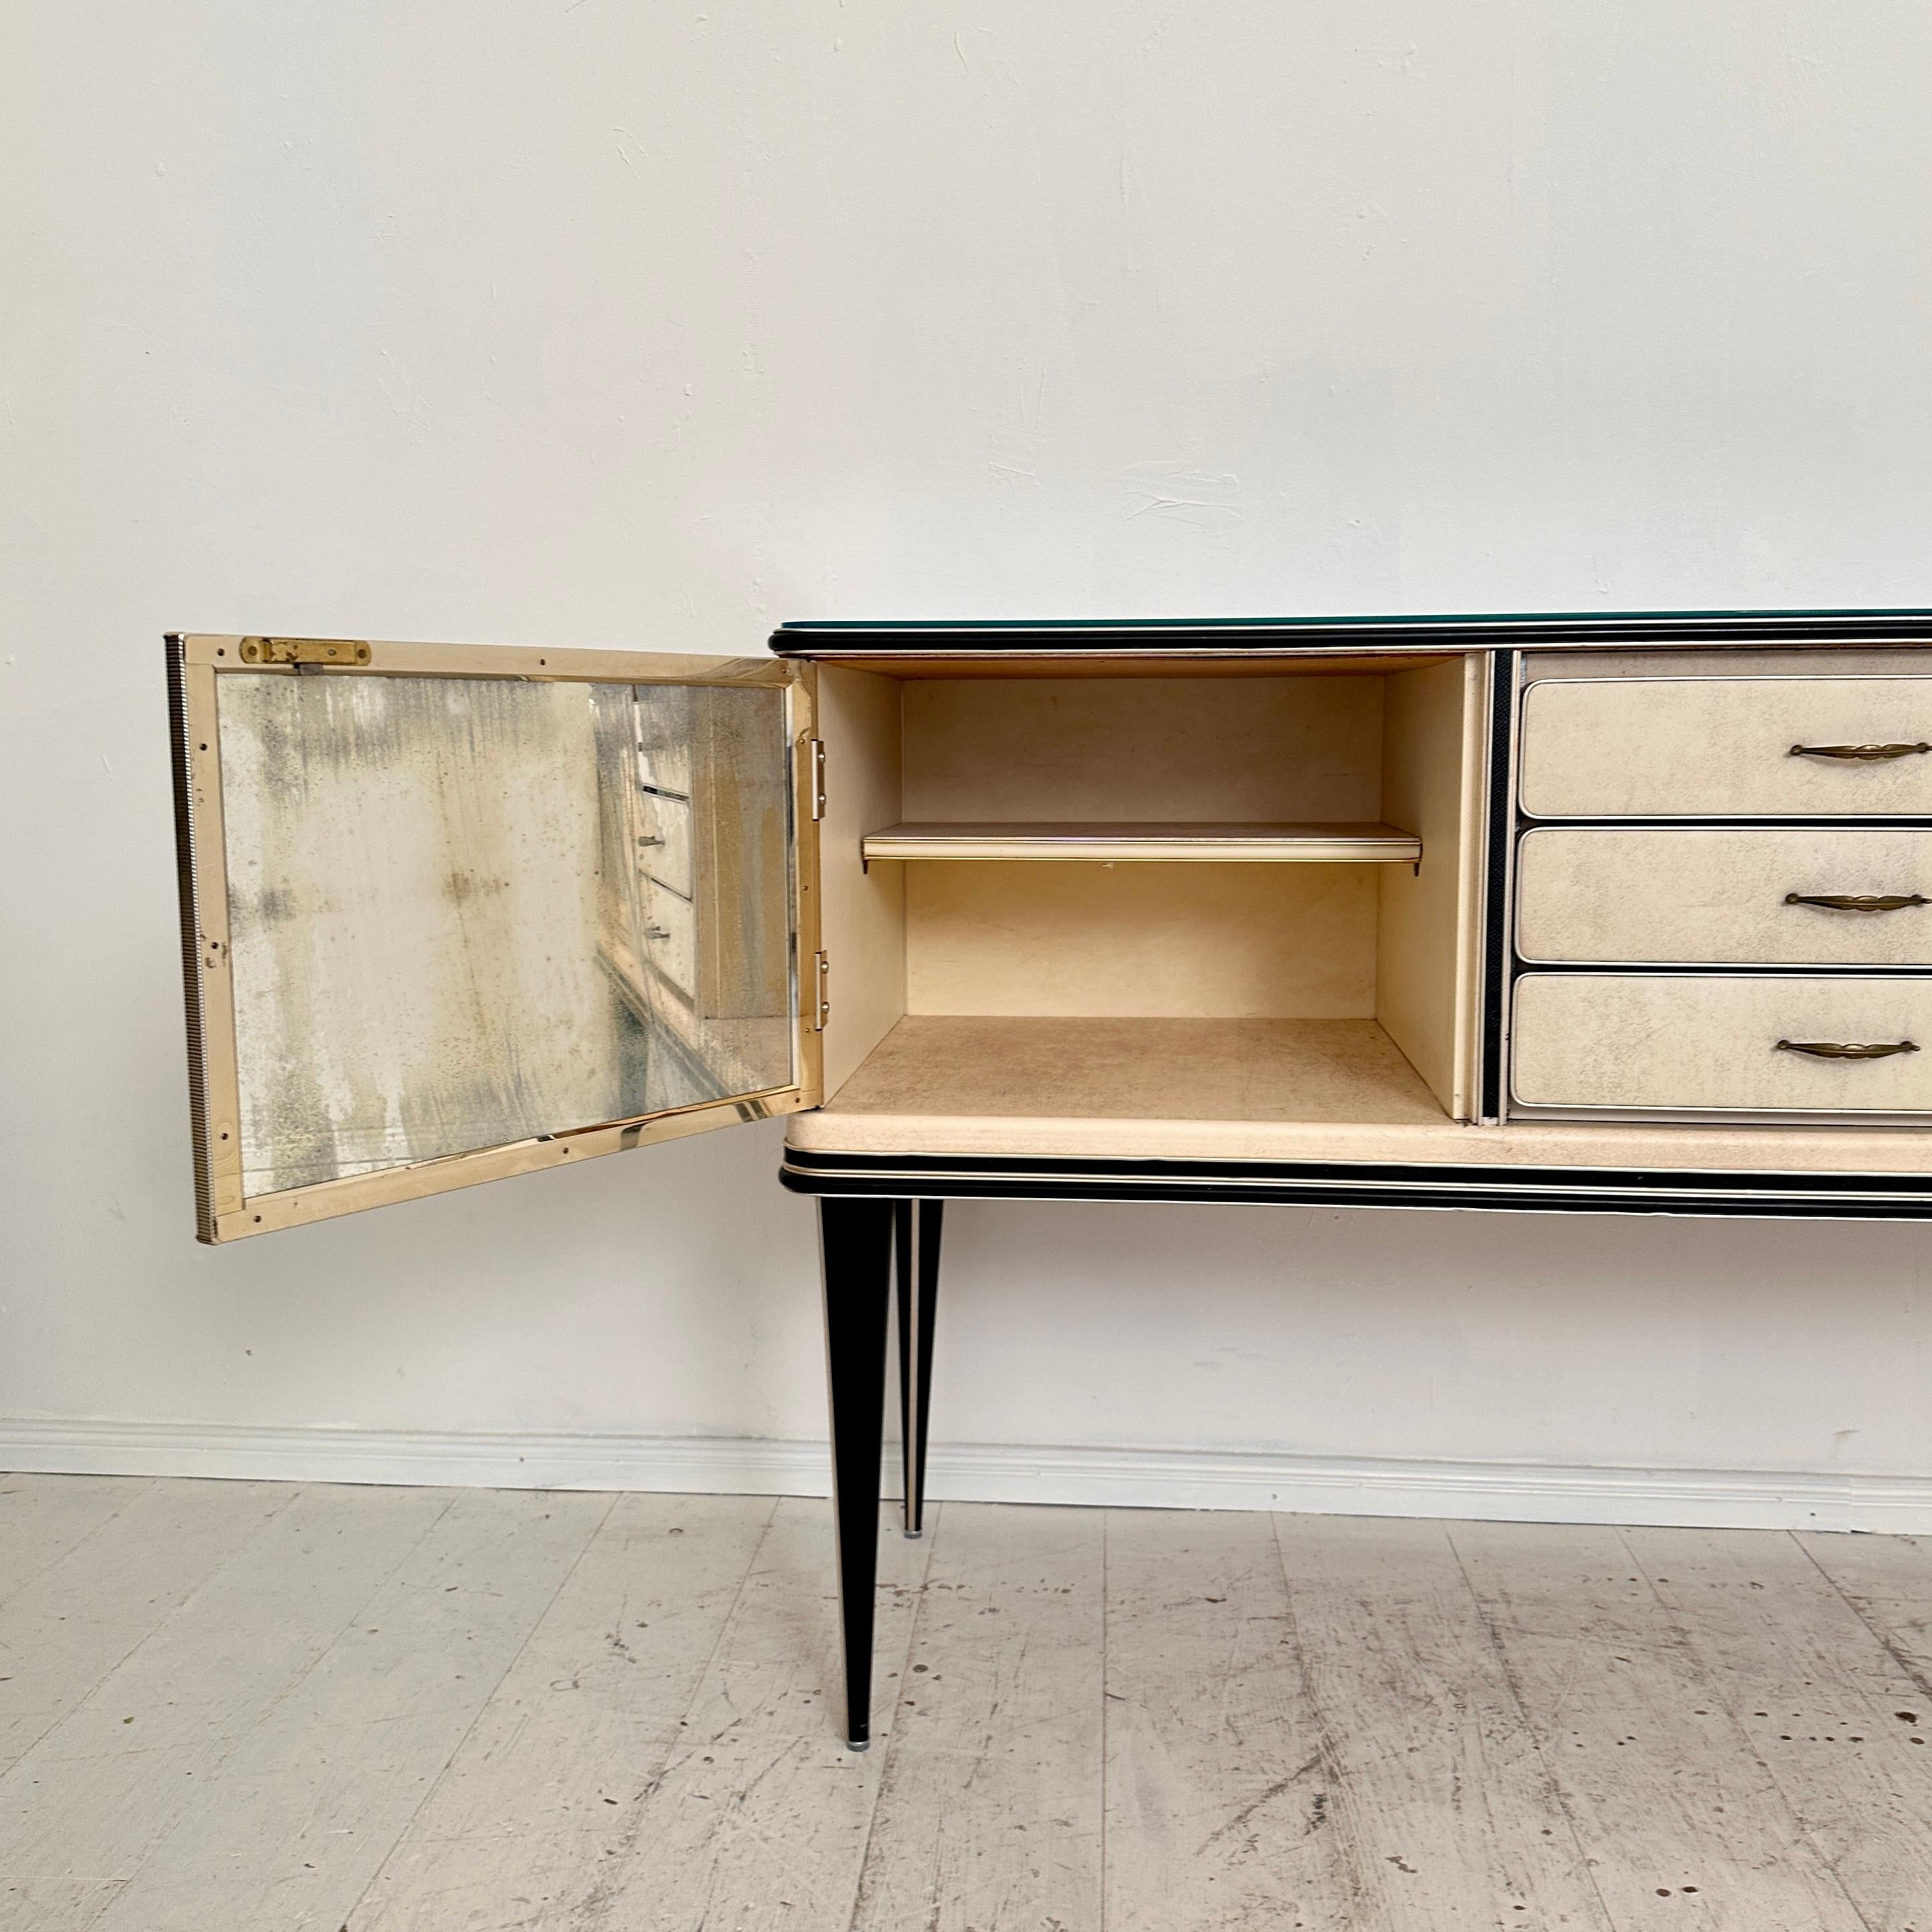 Faux Leather Mid-Century Chinoserie Sideboard by Umberto Mascagni for Harrods London, 1953 For Sale